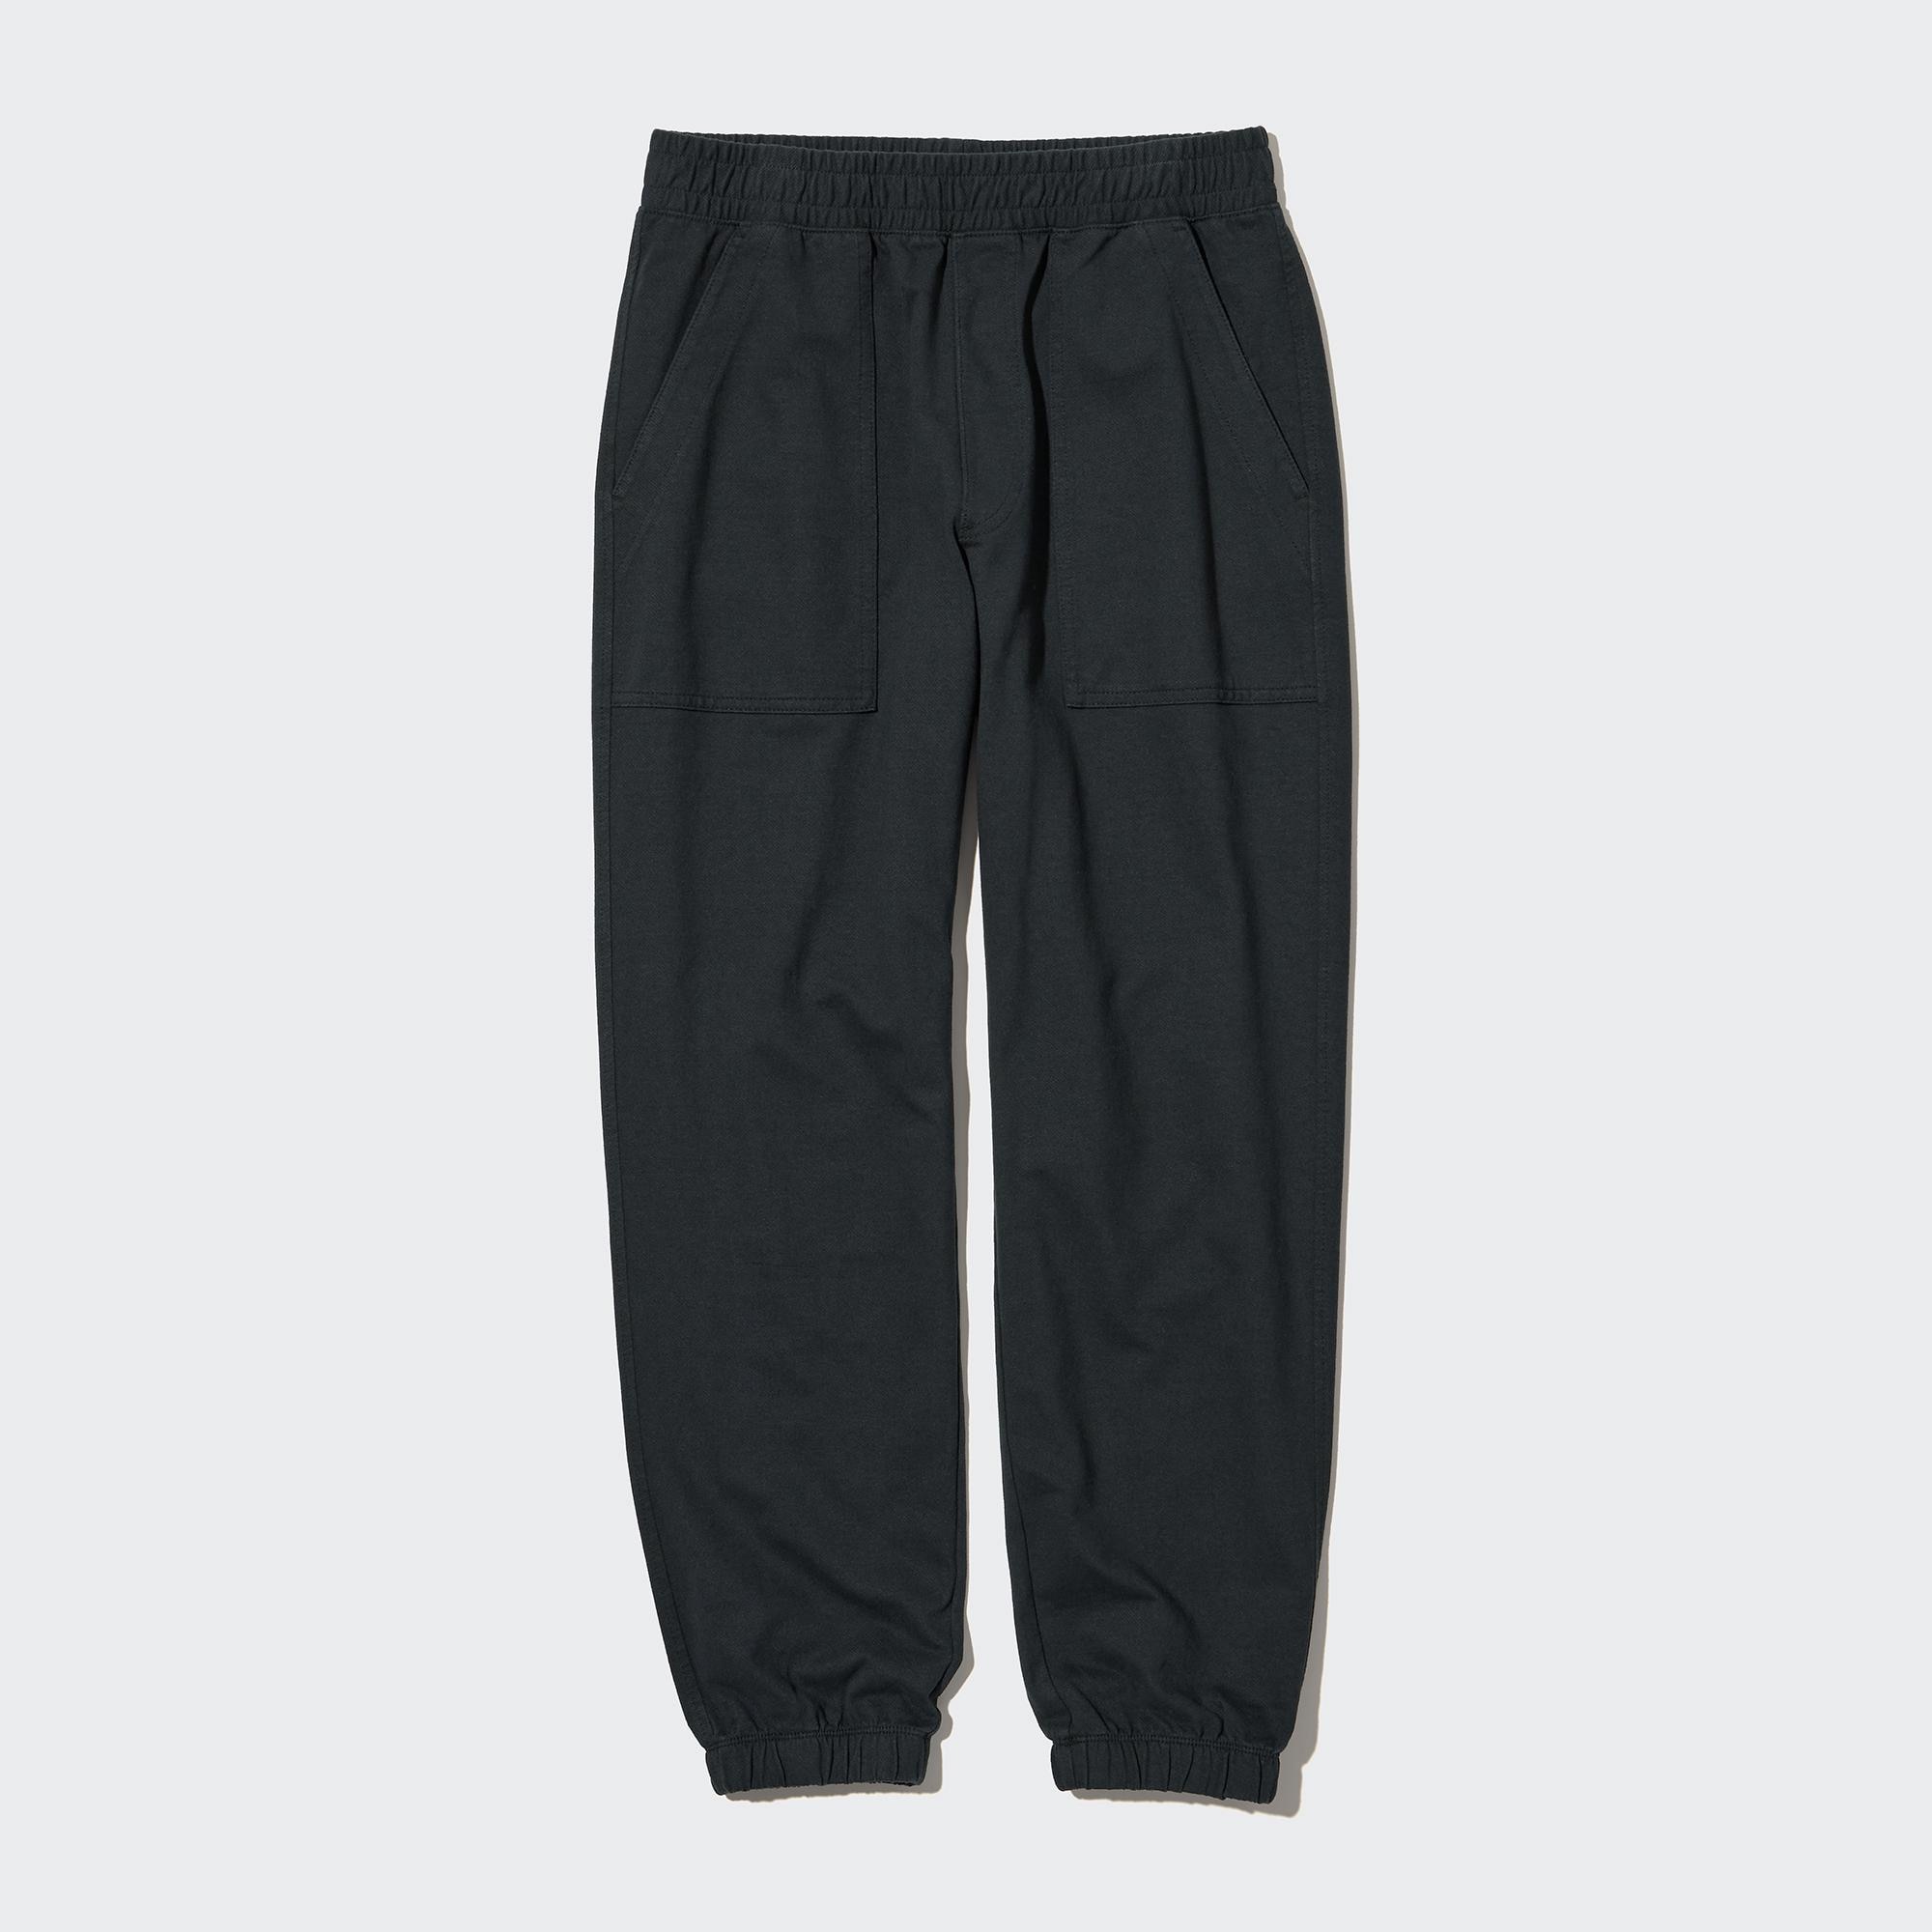 UNIQLO Washed Jersey Ankle Pants